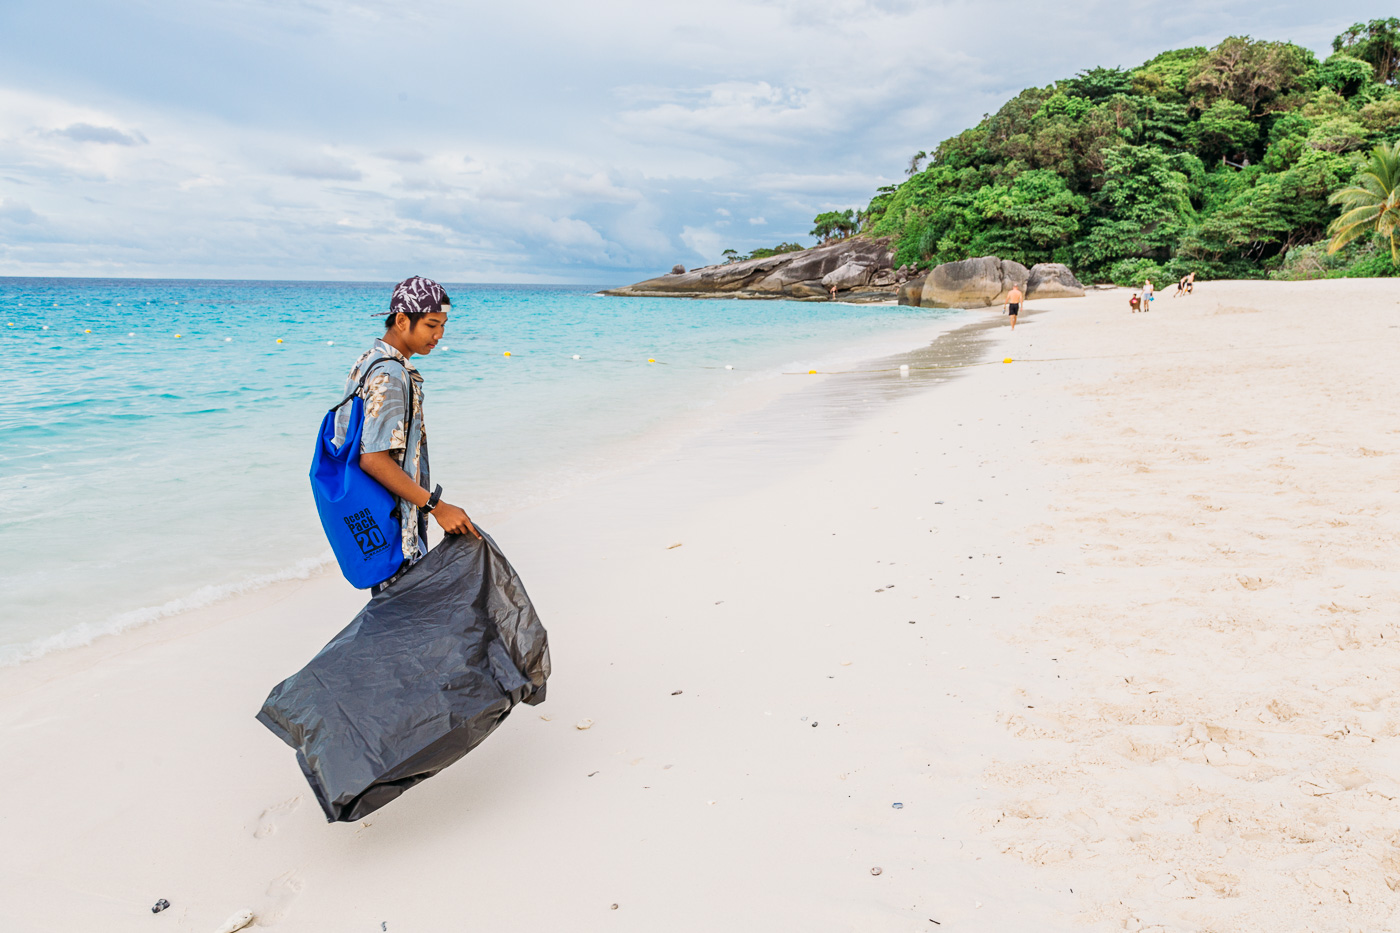 Nack of the Wicked Diving crew leads trash pick up on the Similan Islands during our liveaboard